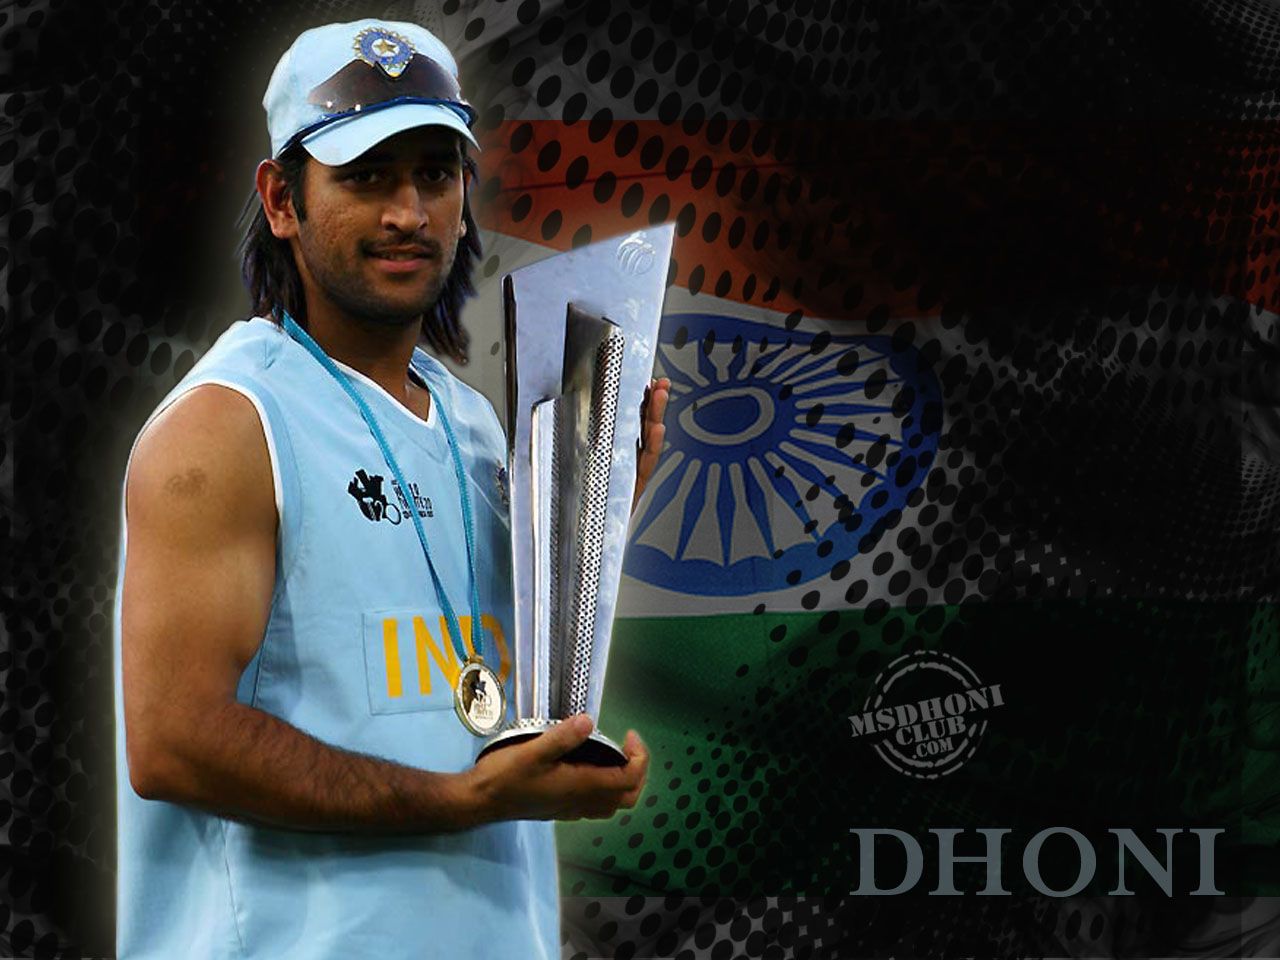 Ms Dhoni Long Hair HD Wallpapers Free HD Wallpapers for Desktop